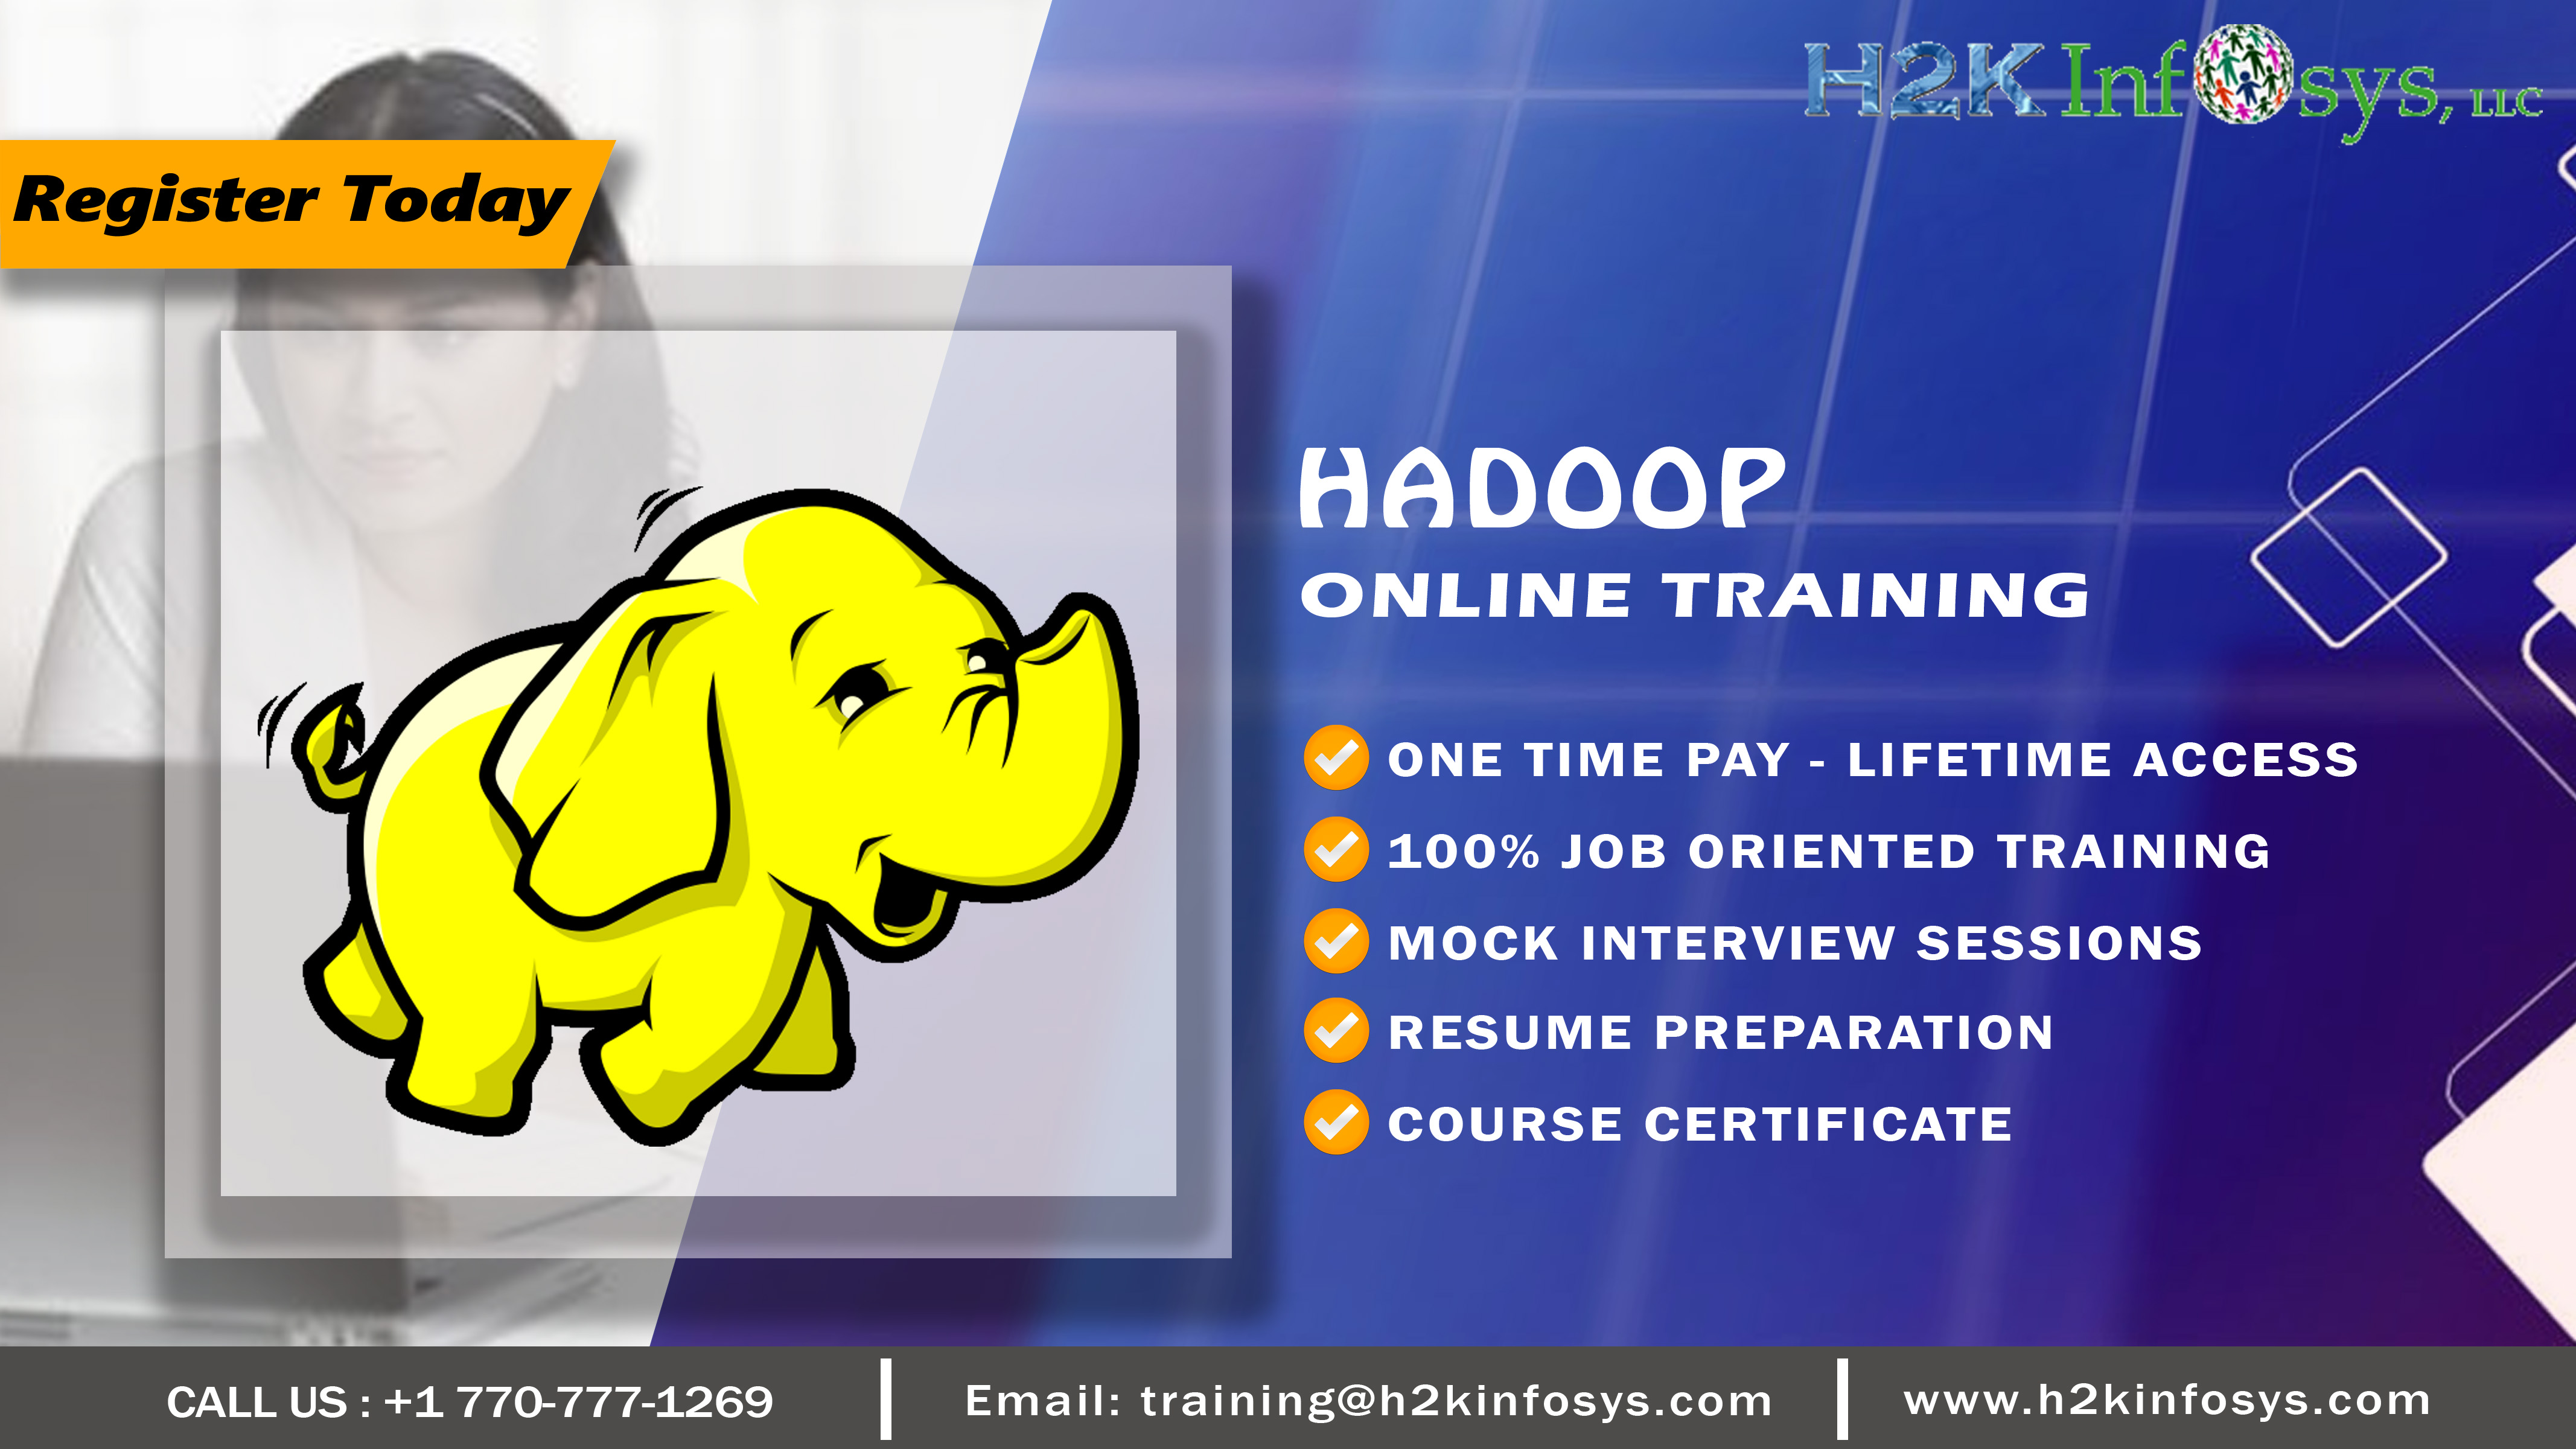 Hadoop Online Course with Placements Assistance